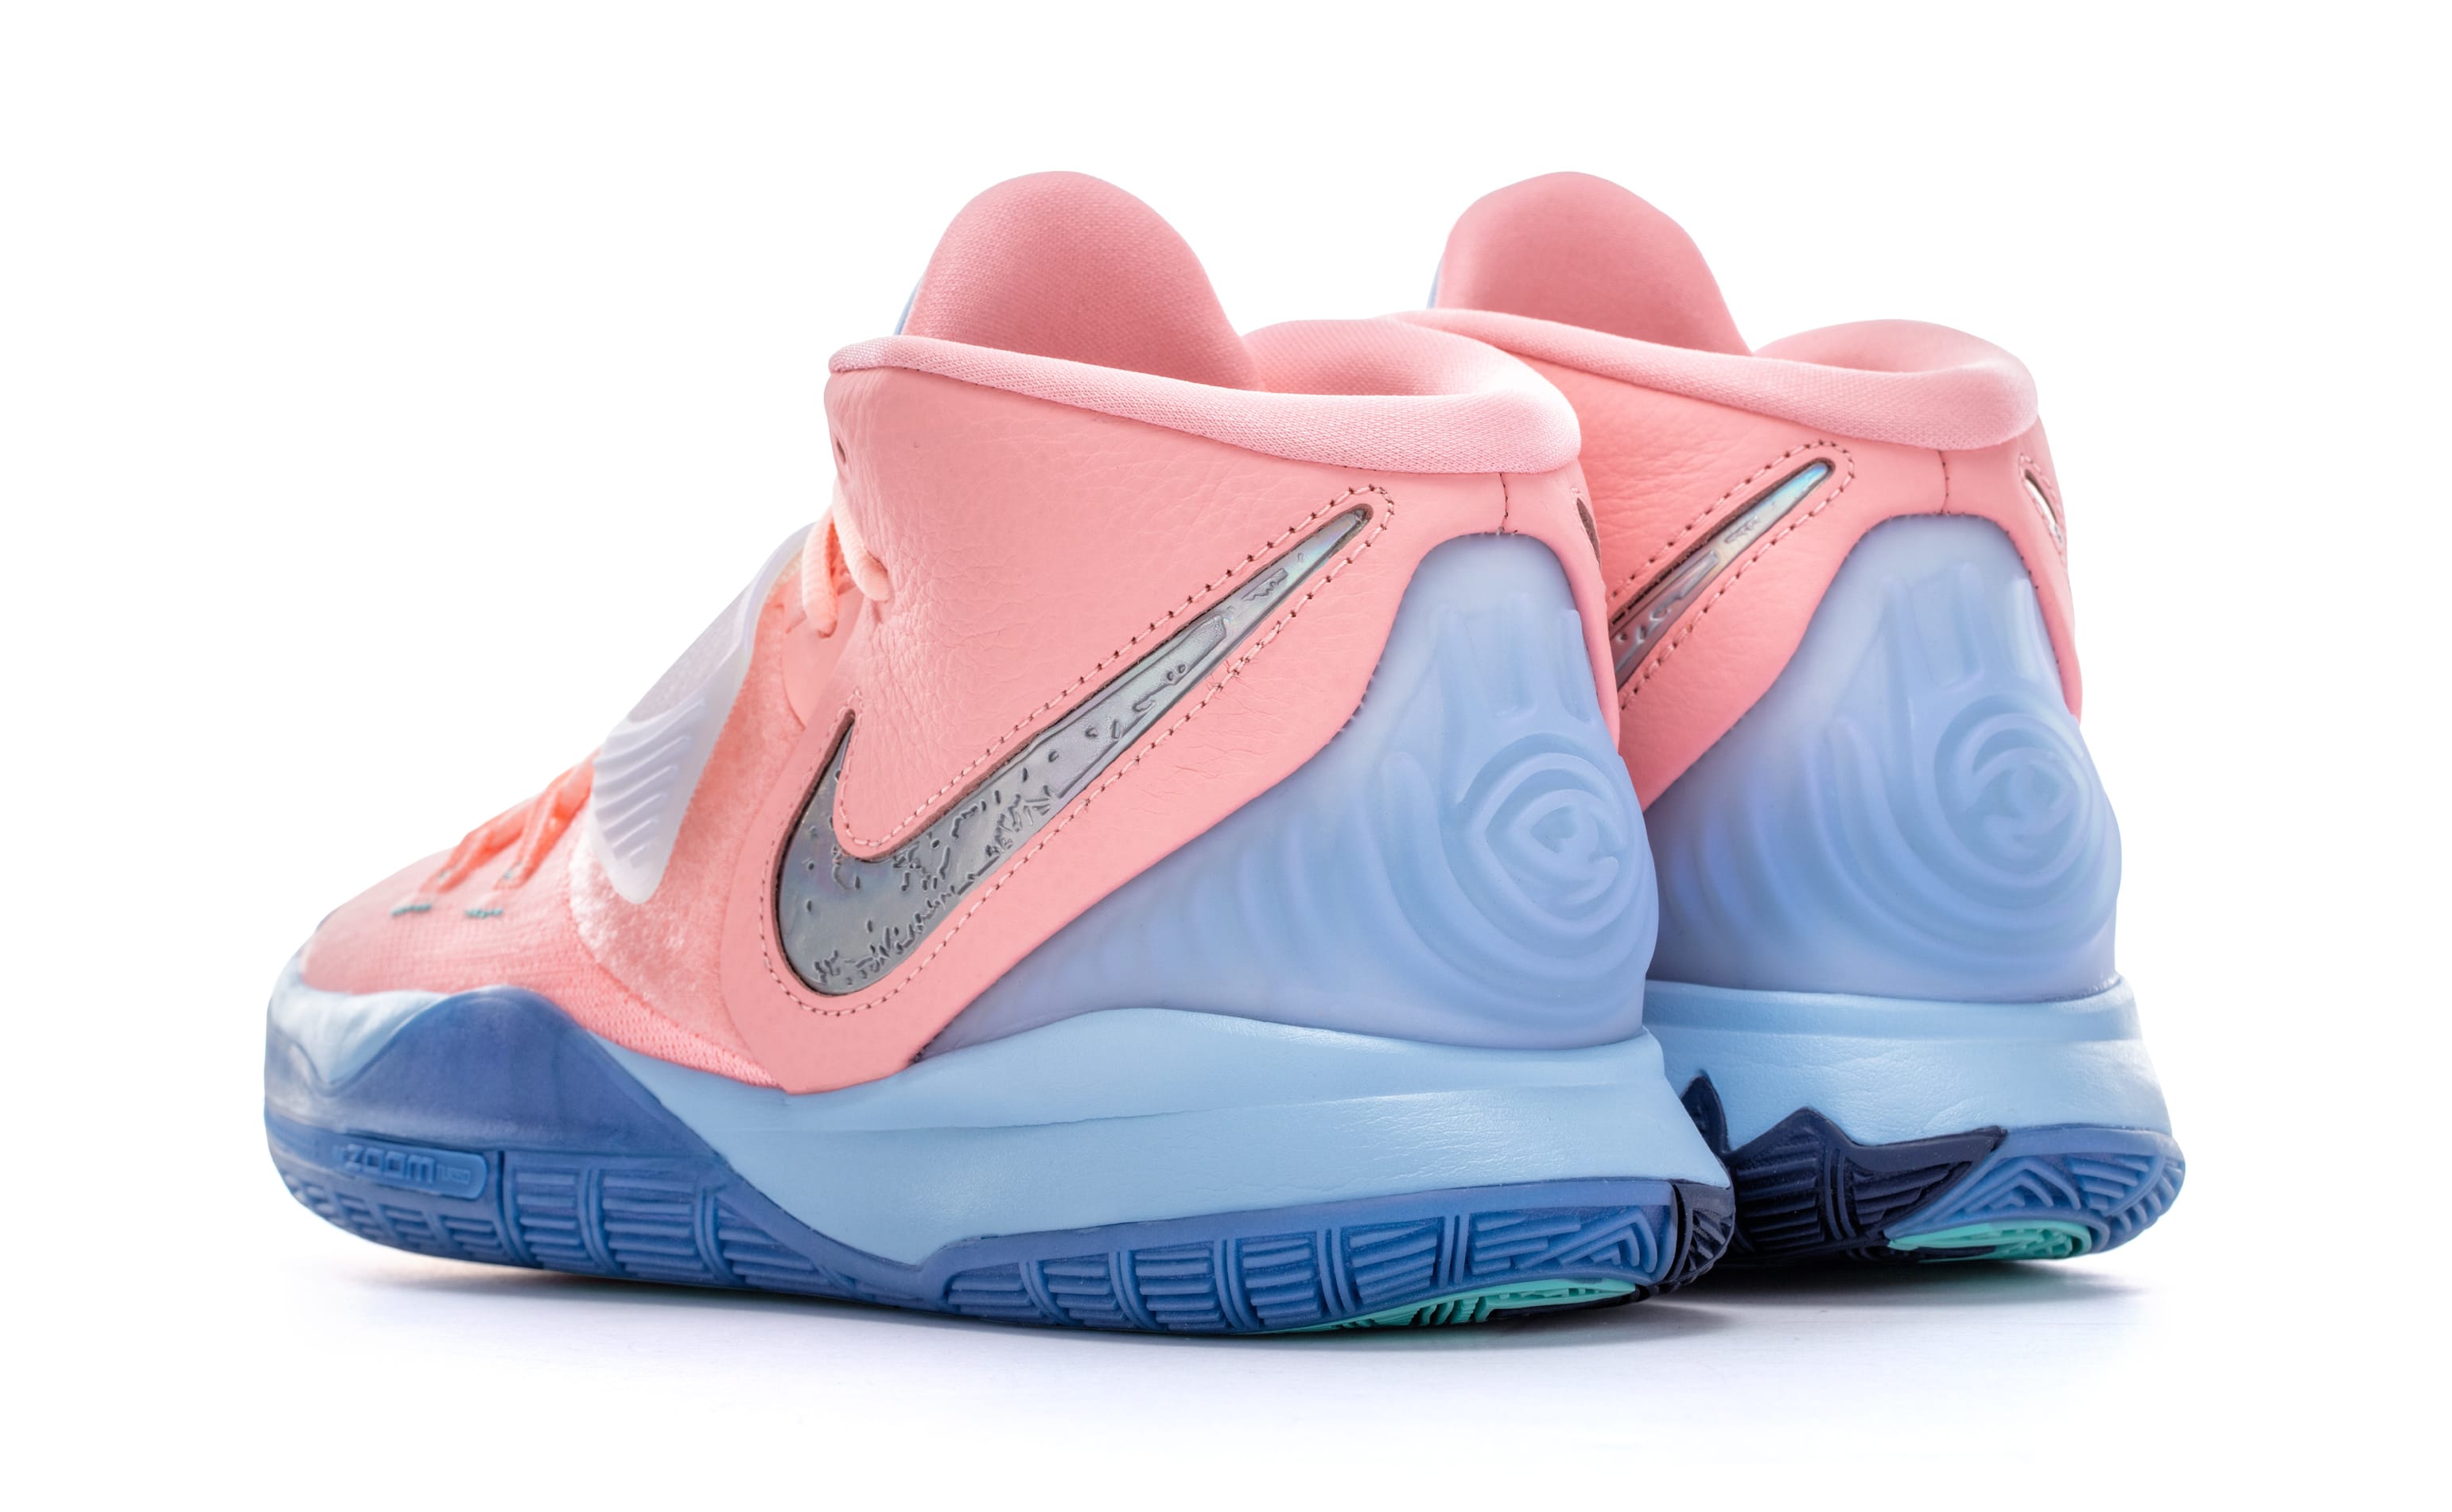 kyrie irving 6 pink